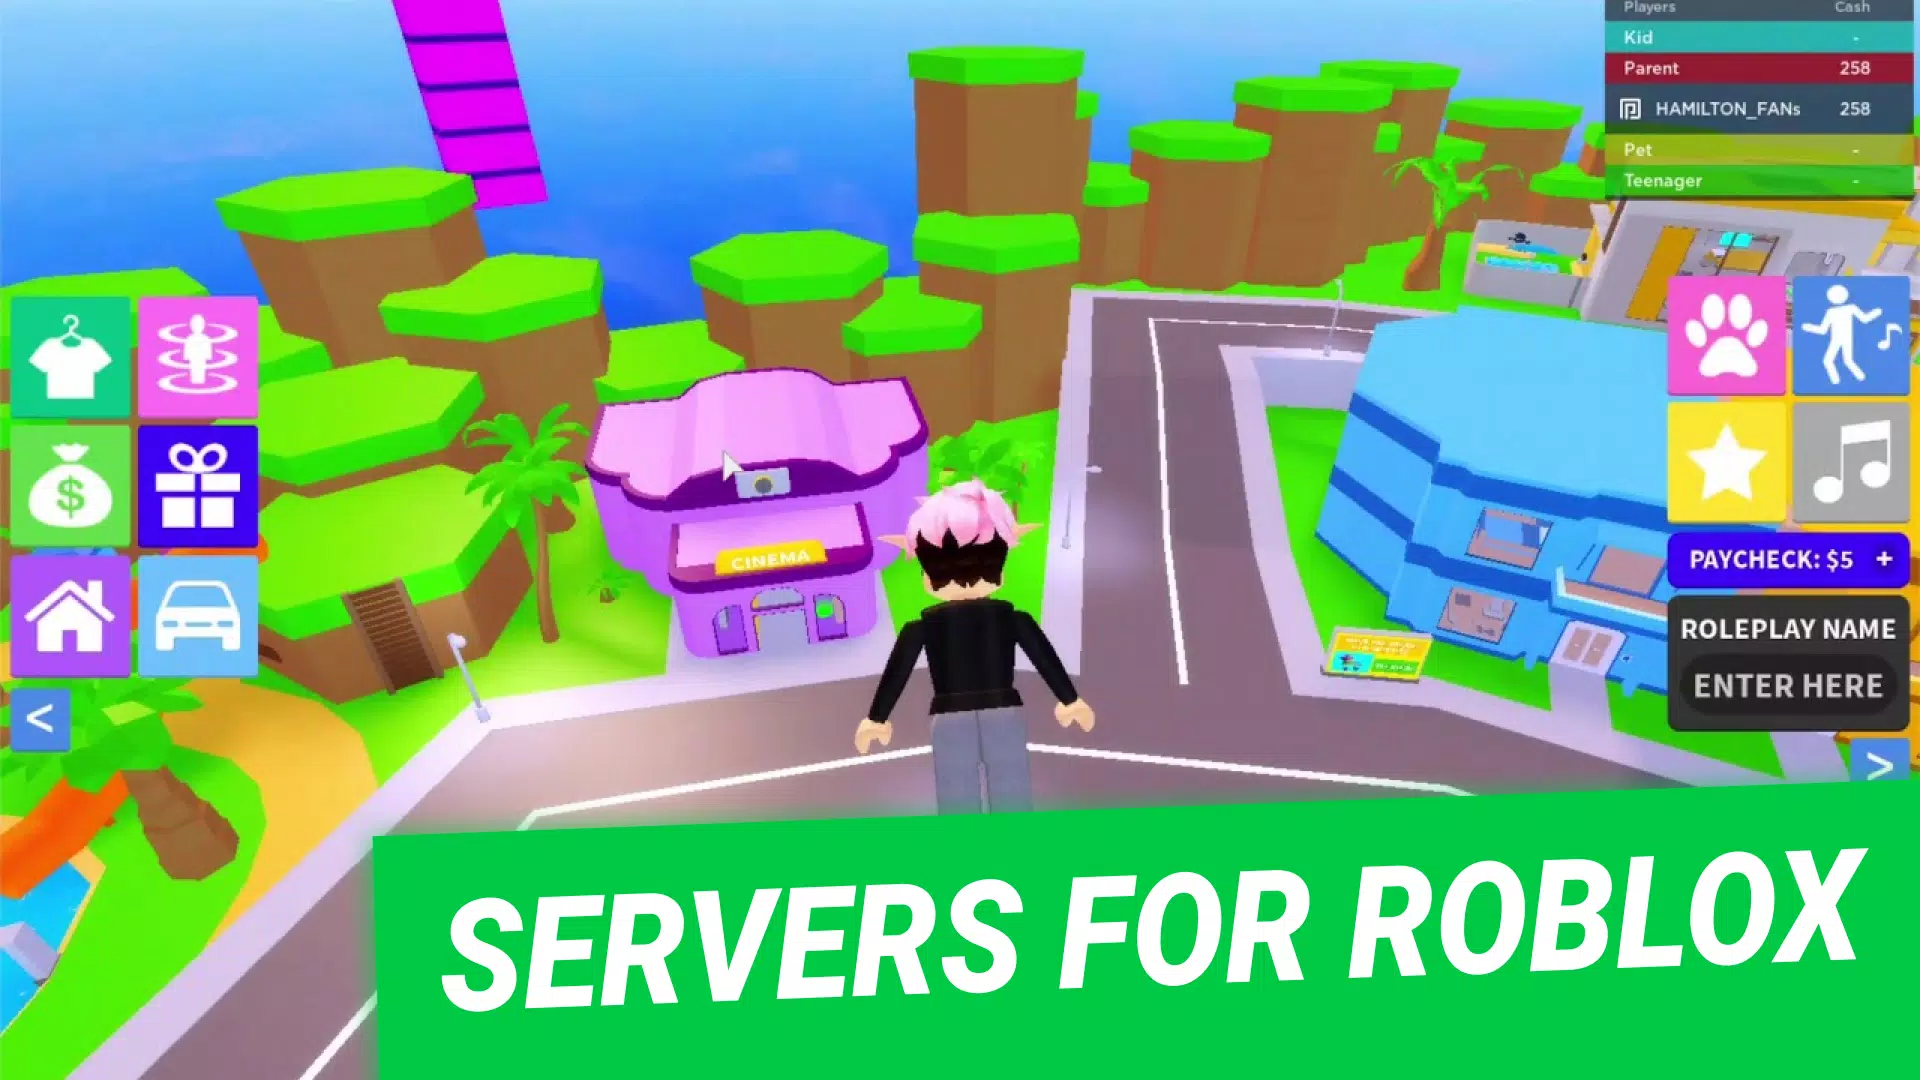 How to download the new Roblox studio apk now for free 